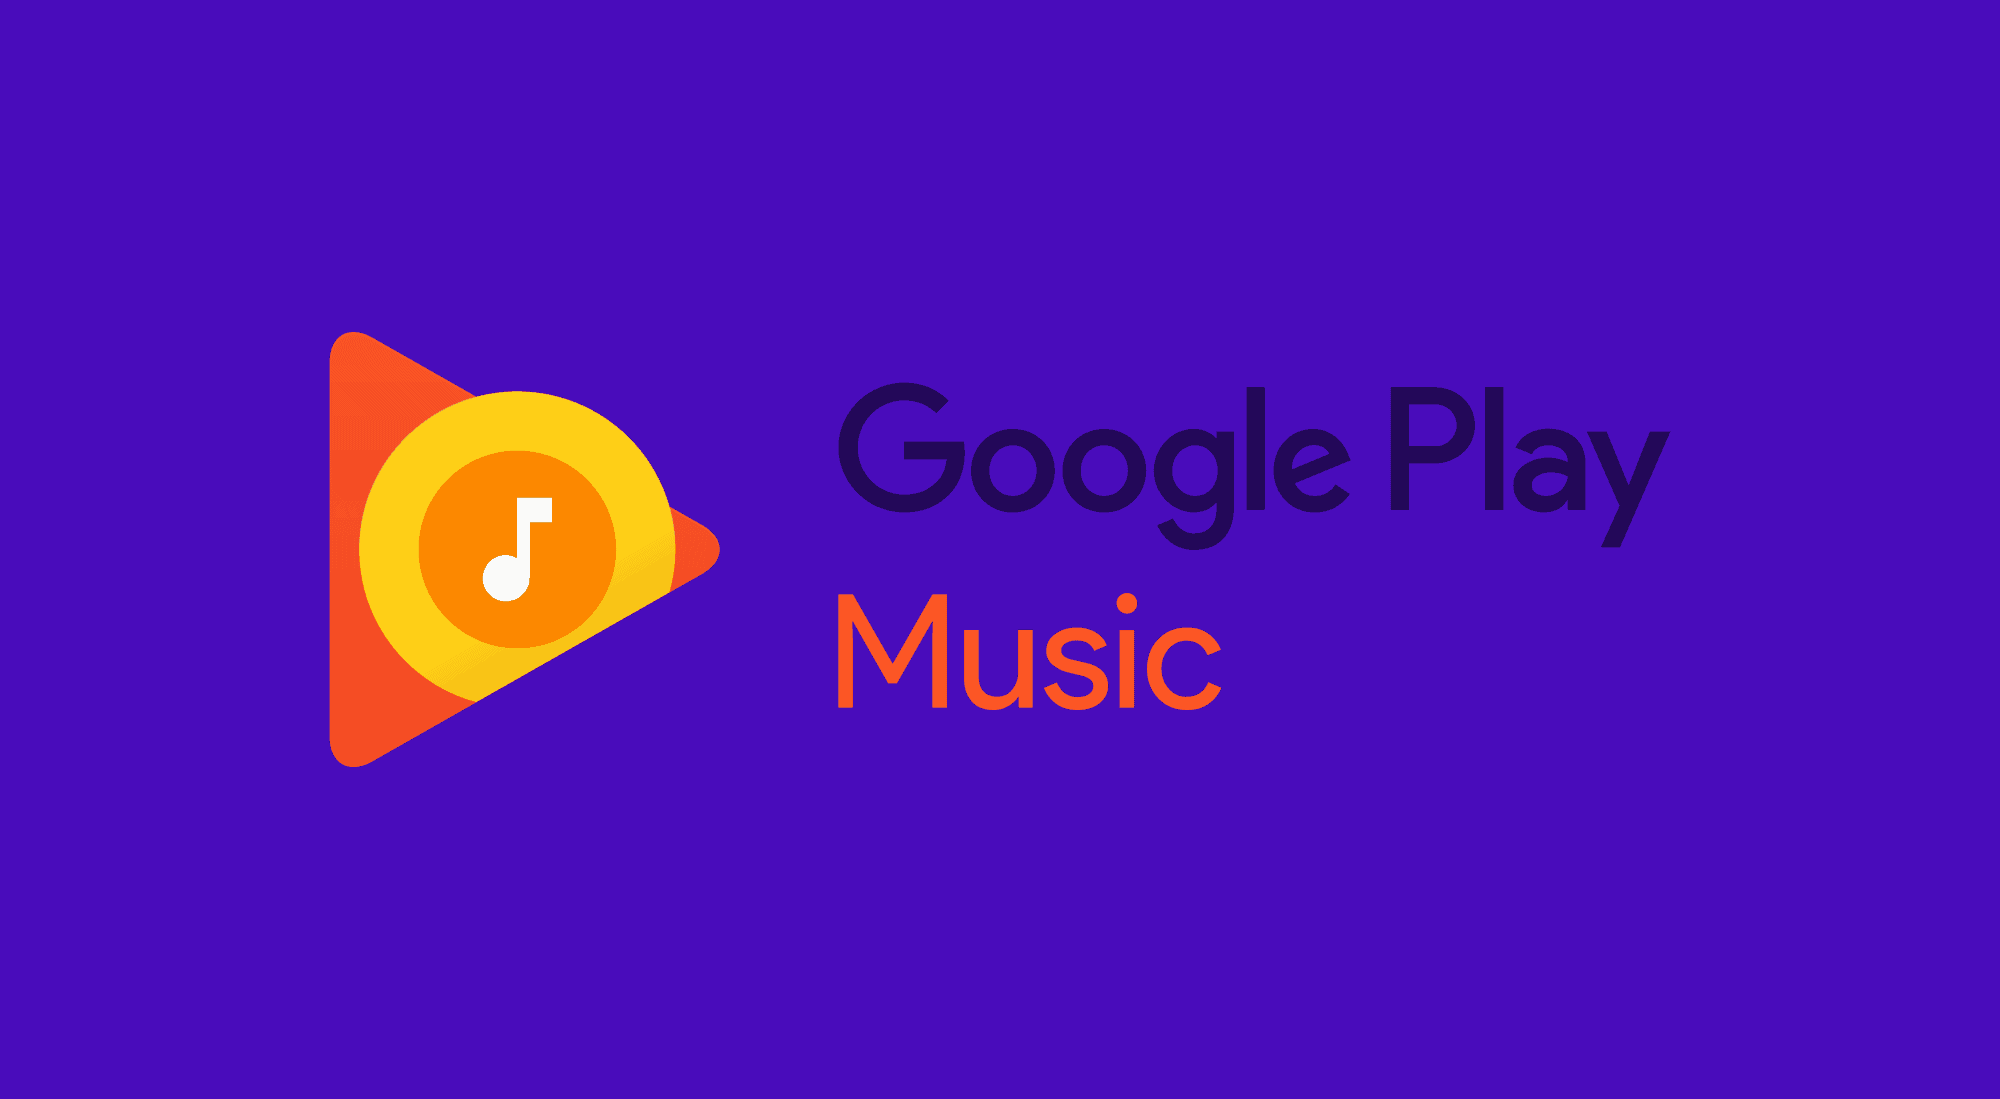 Google Play Music iOS app gets "Playing Near You" section with the latest update